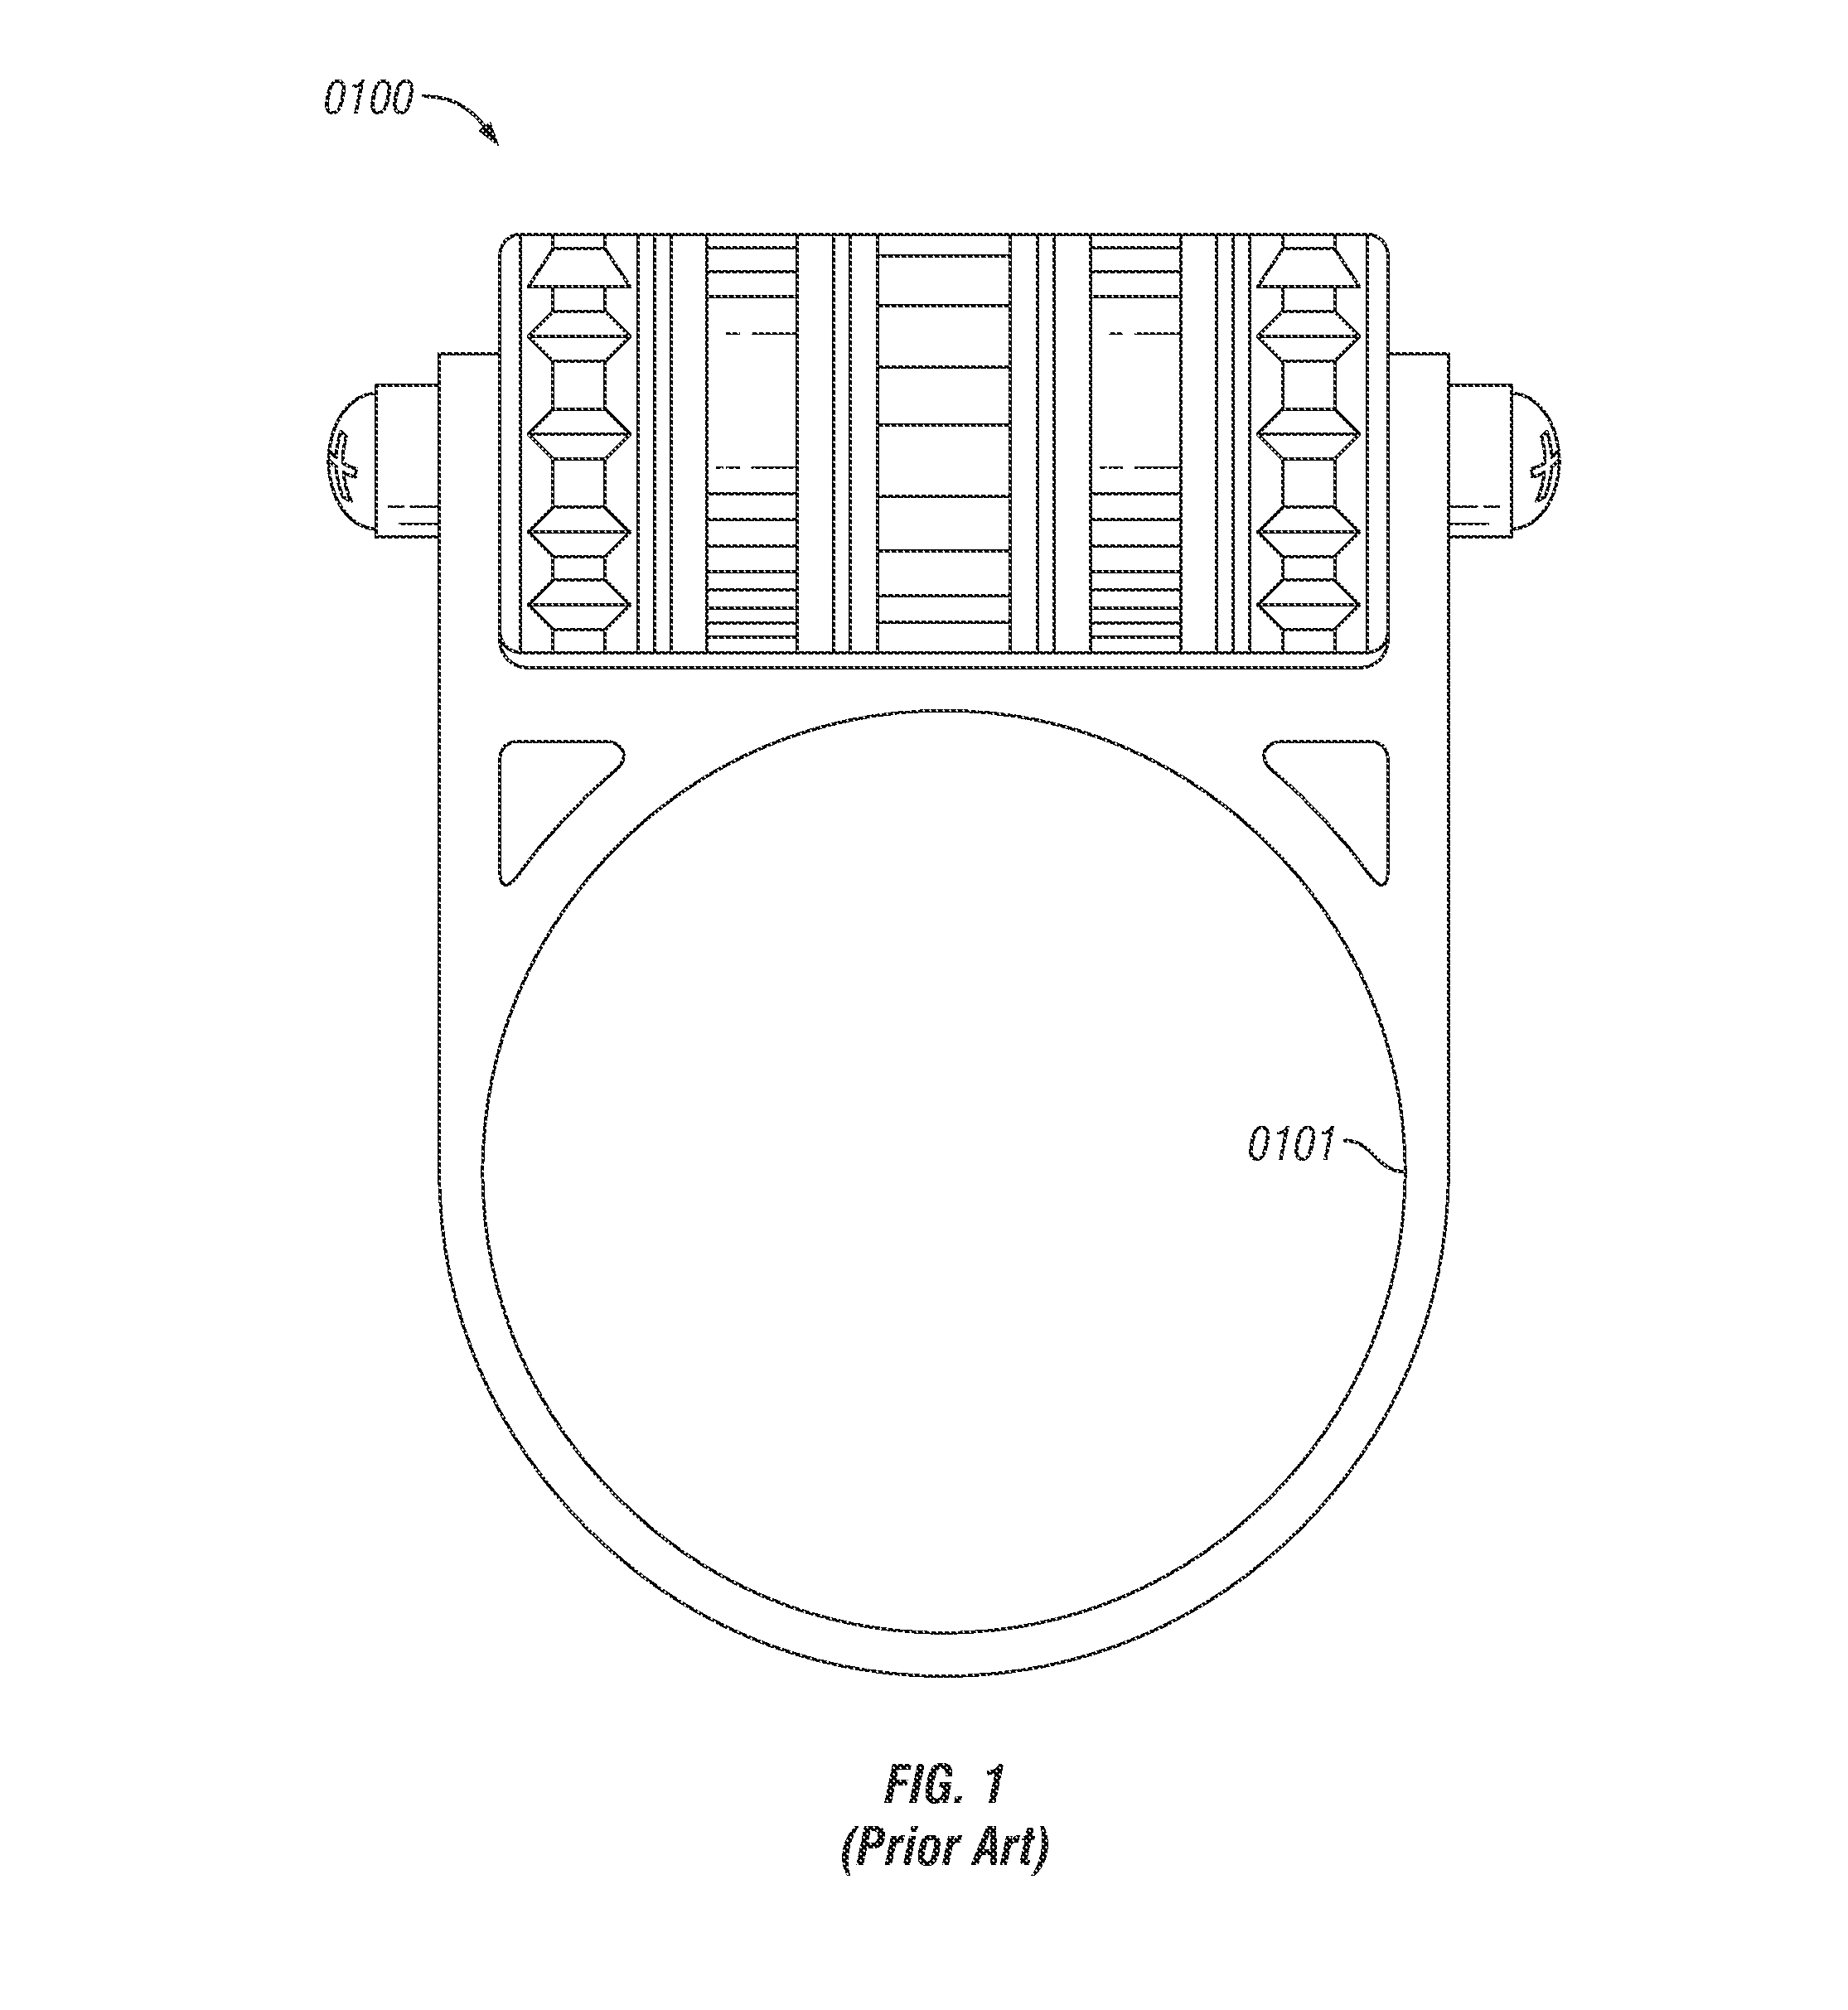 Jewelry ornament system and method